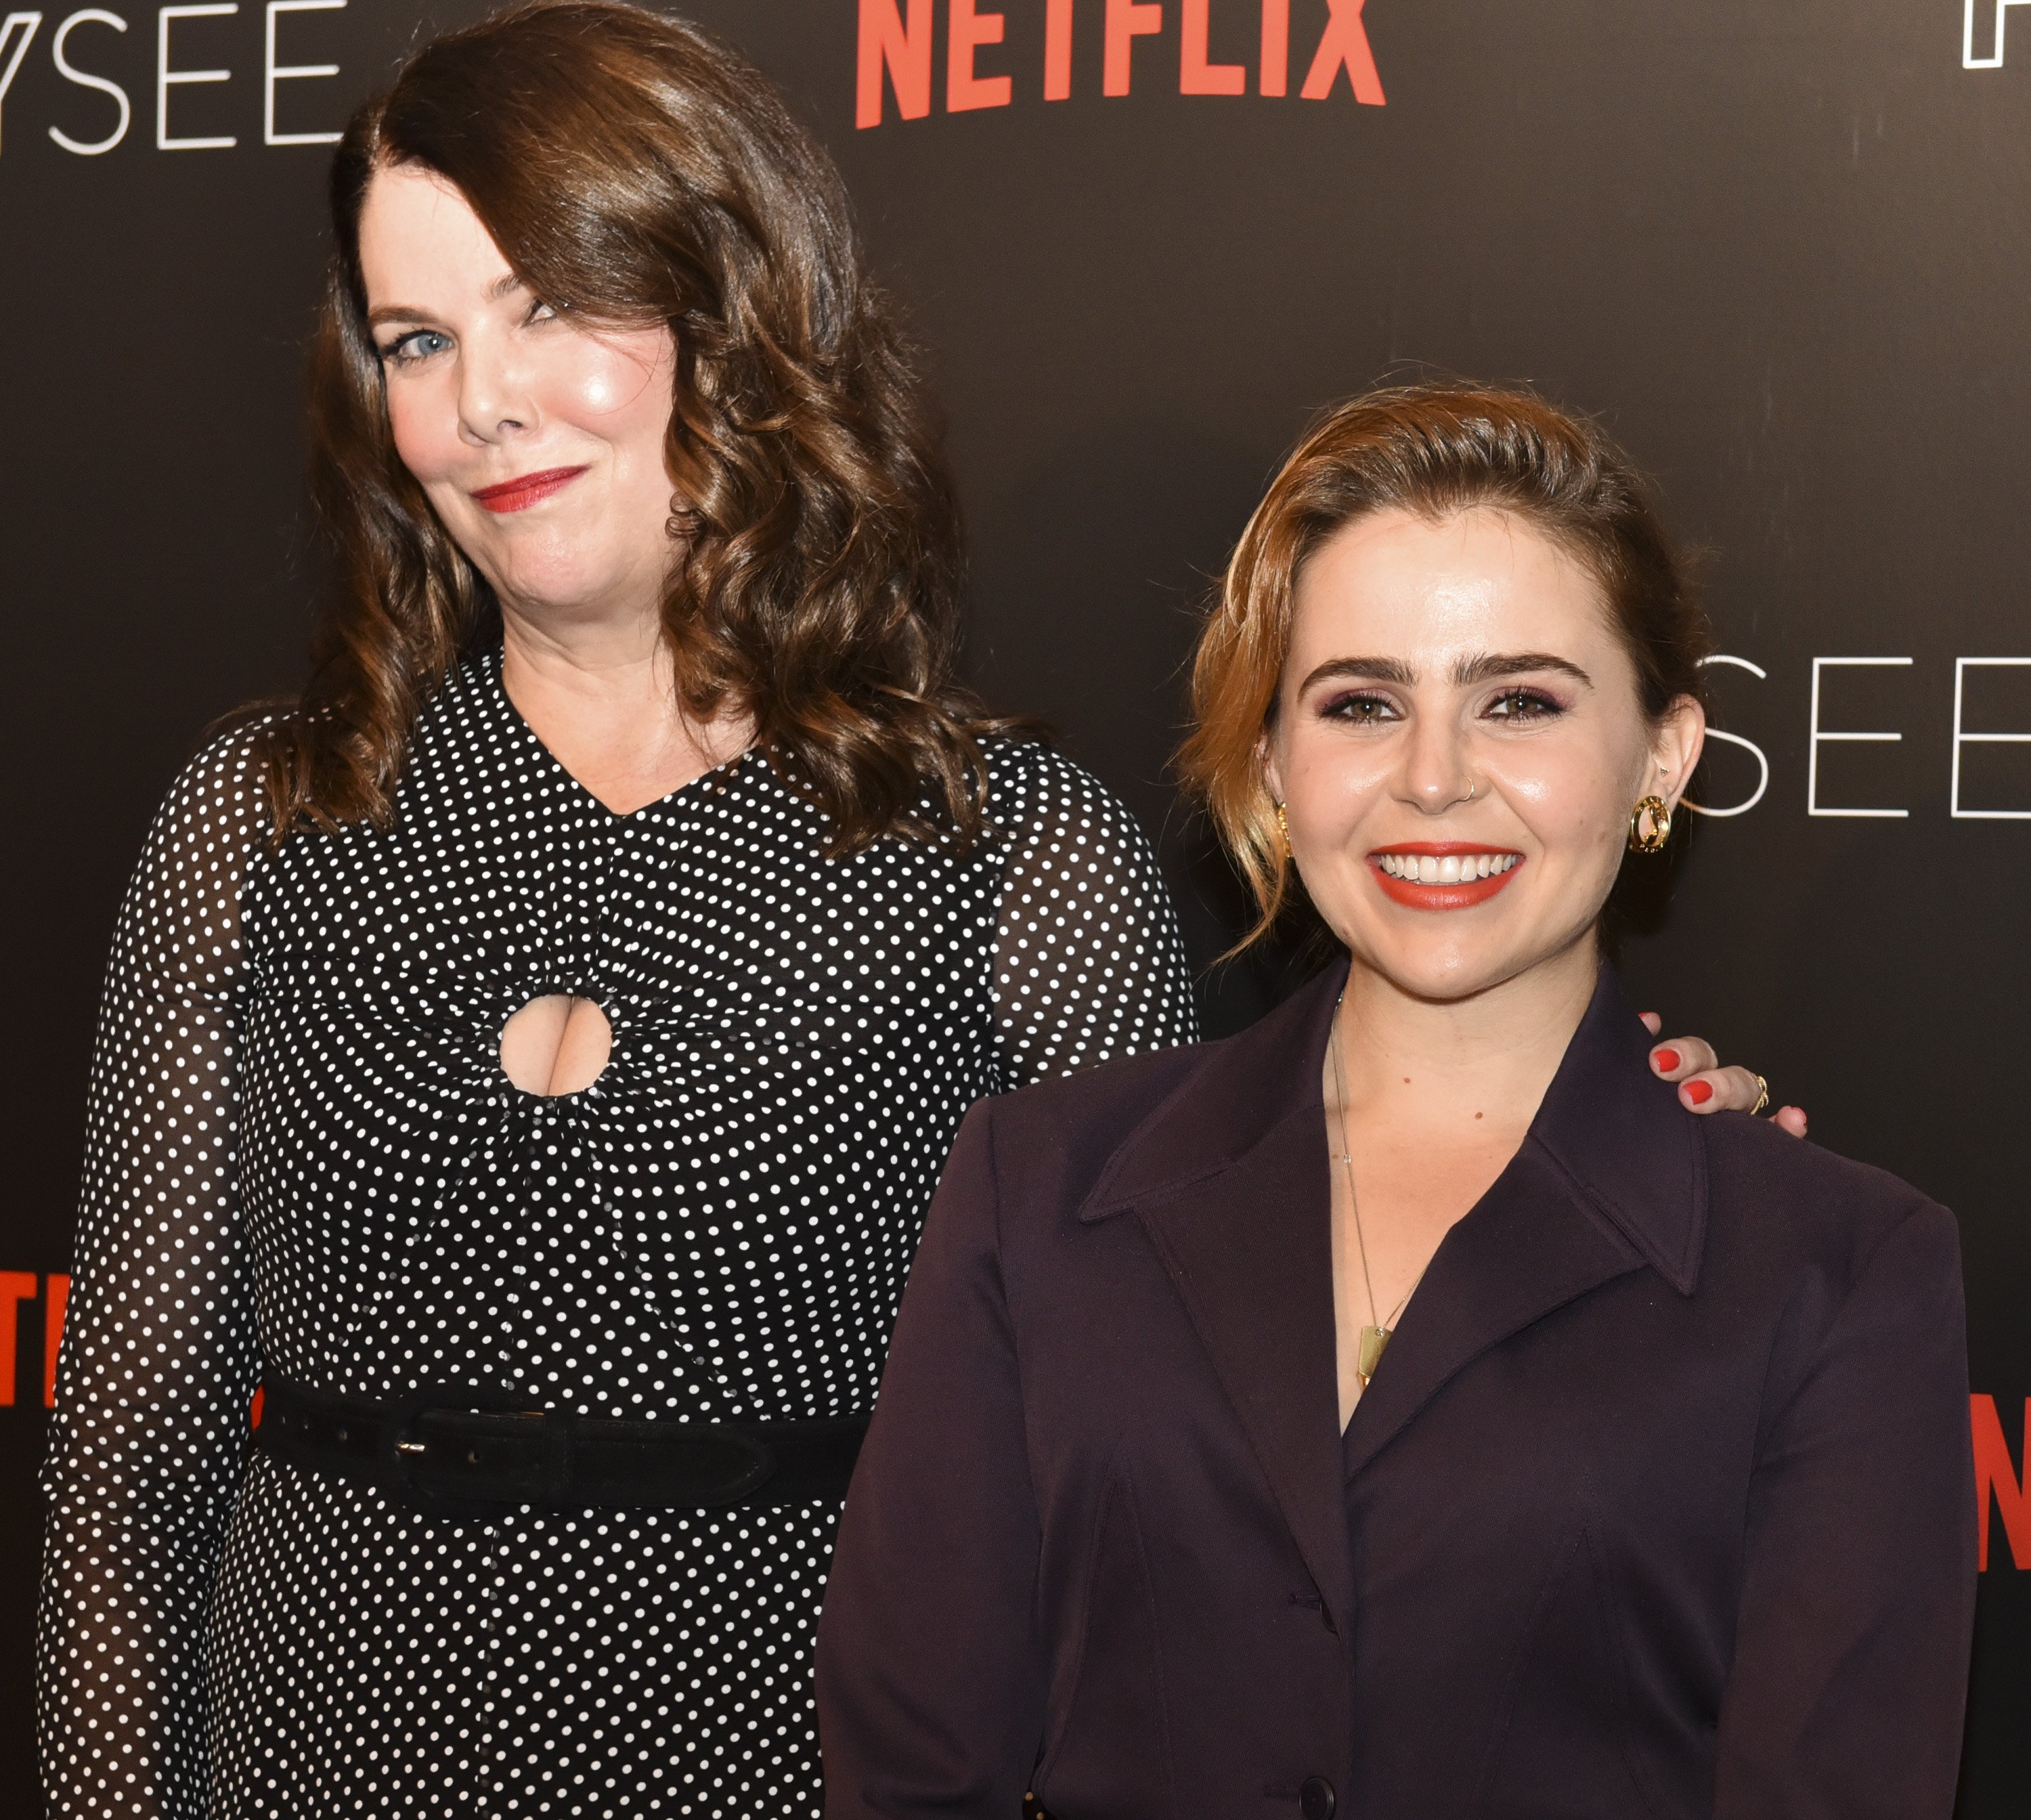 'Good Girls' star Mae Whitman smiling in a black blazer while standing next to her 'Parenthood' co-star, Lauren Graham, who is wearing a black and white polka dot dress.